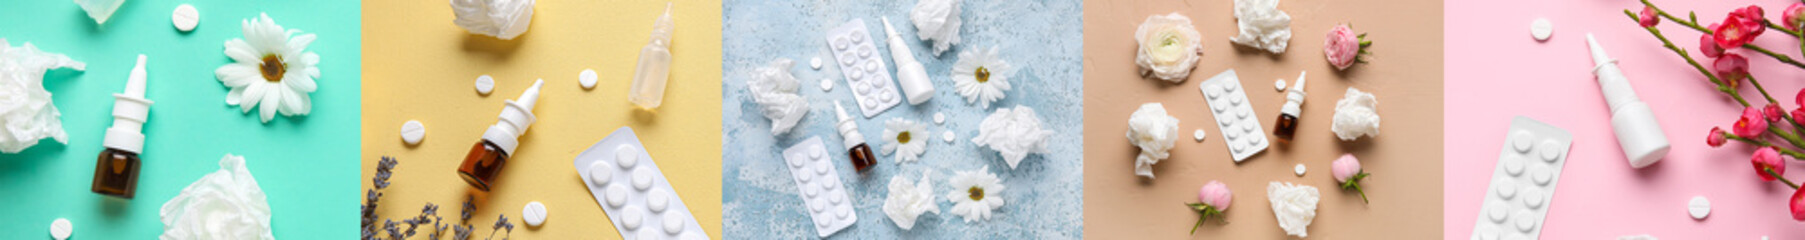 Collage with nasal drops, pills, flowers and tissues on color background. Allergy concept